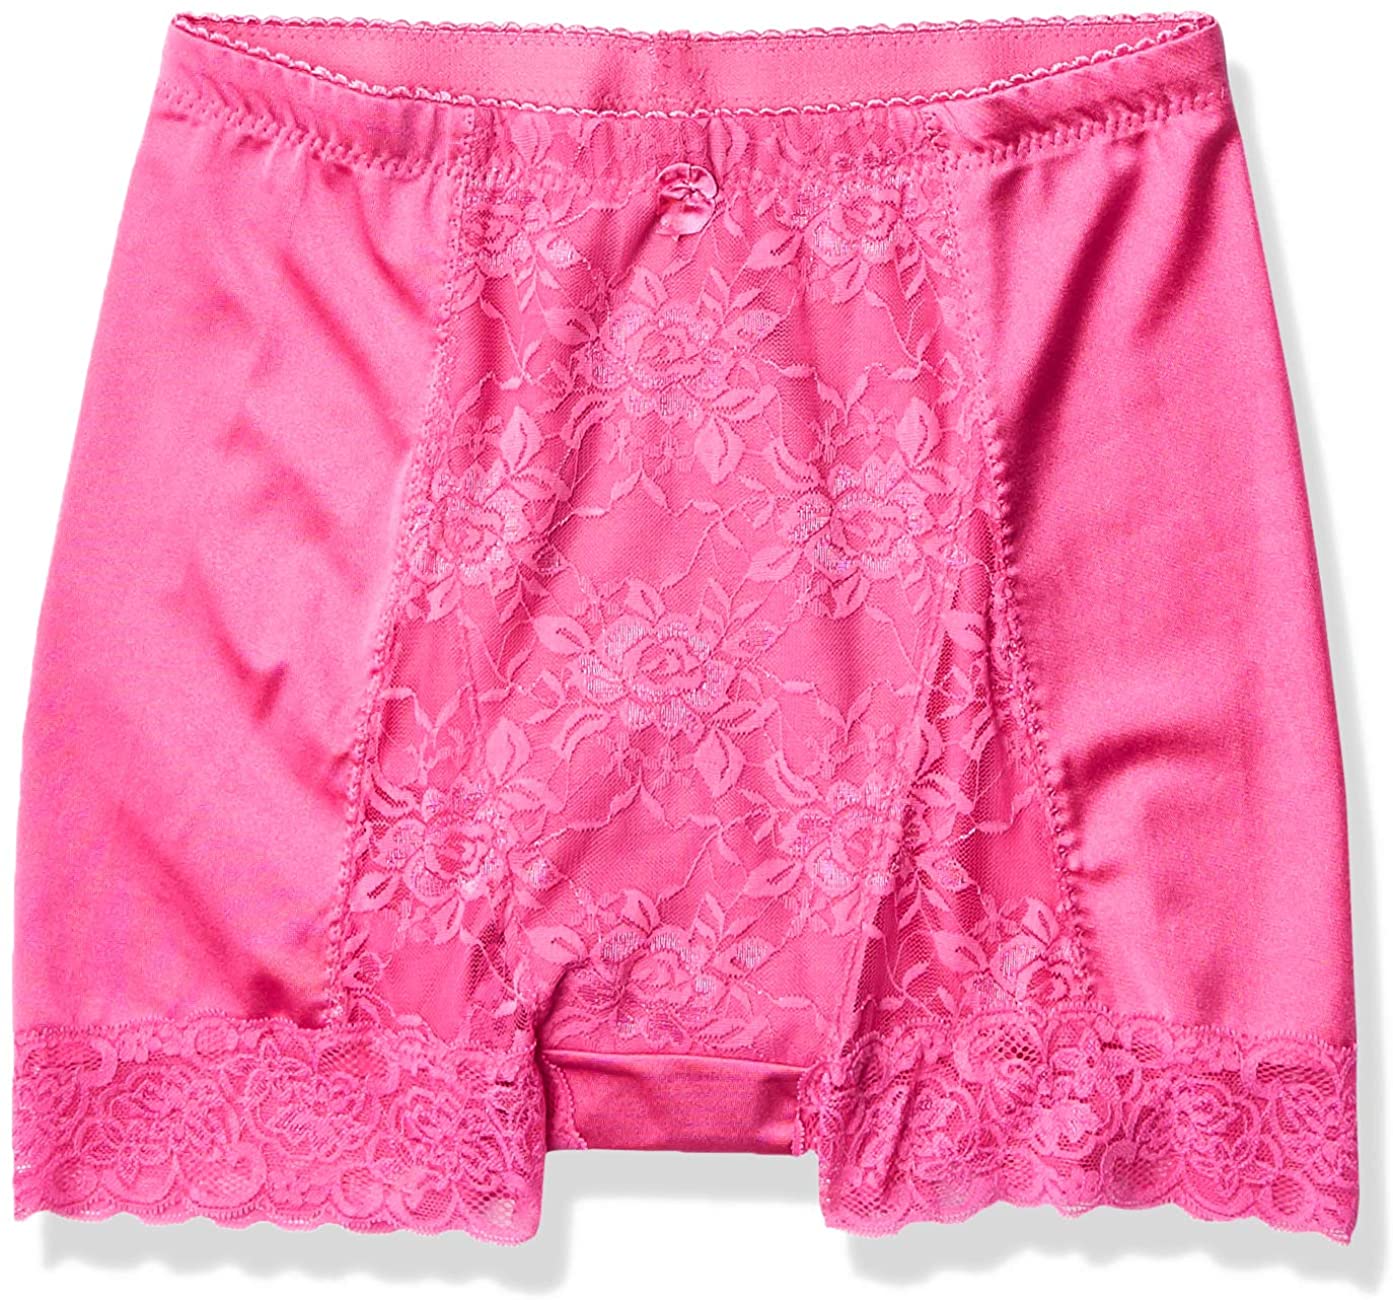 Ahh By Rhonda Shear Women's Pin Up Lace Control Full Coverage Panty